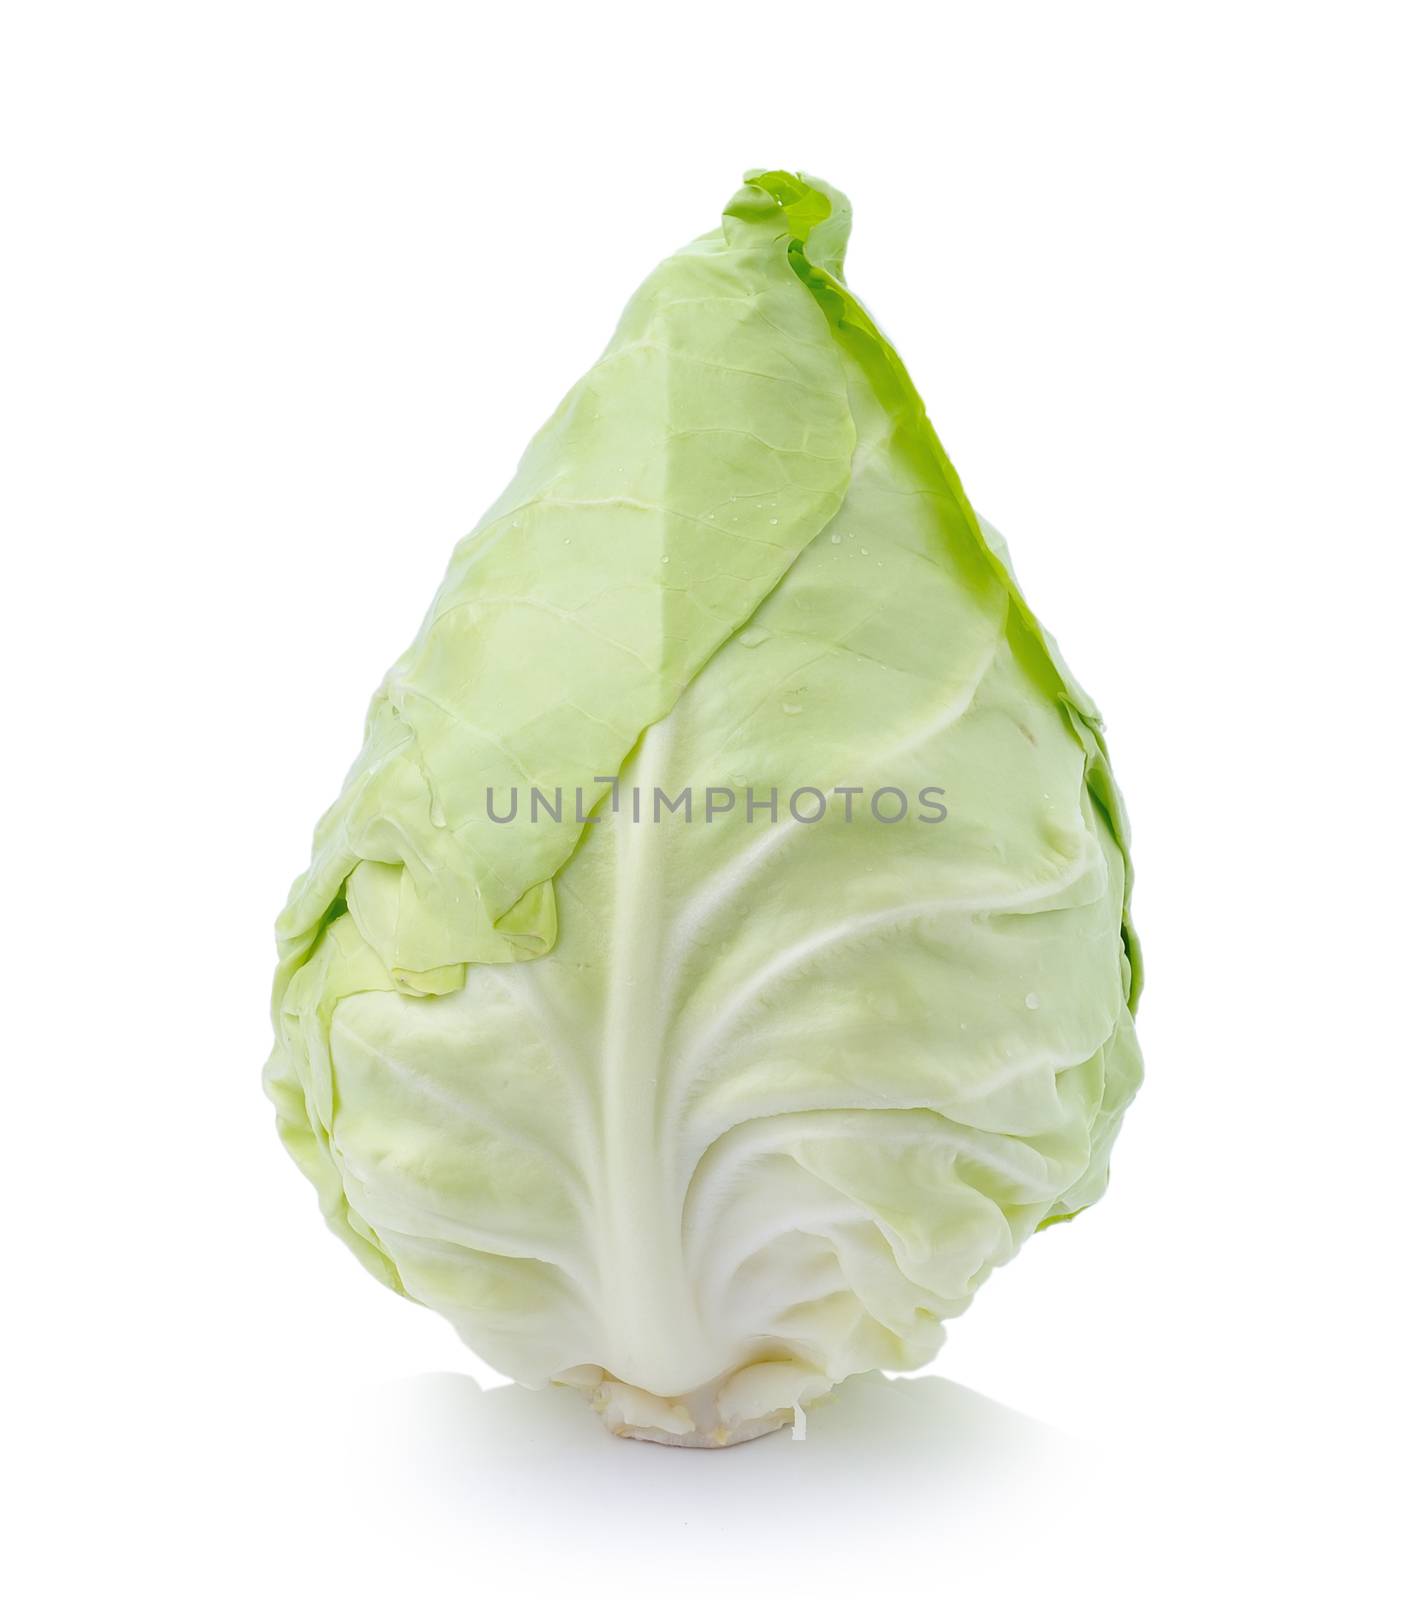 green cabbage isolated on white